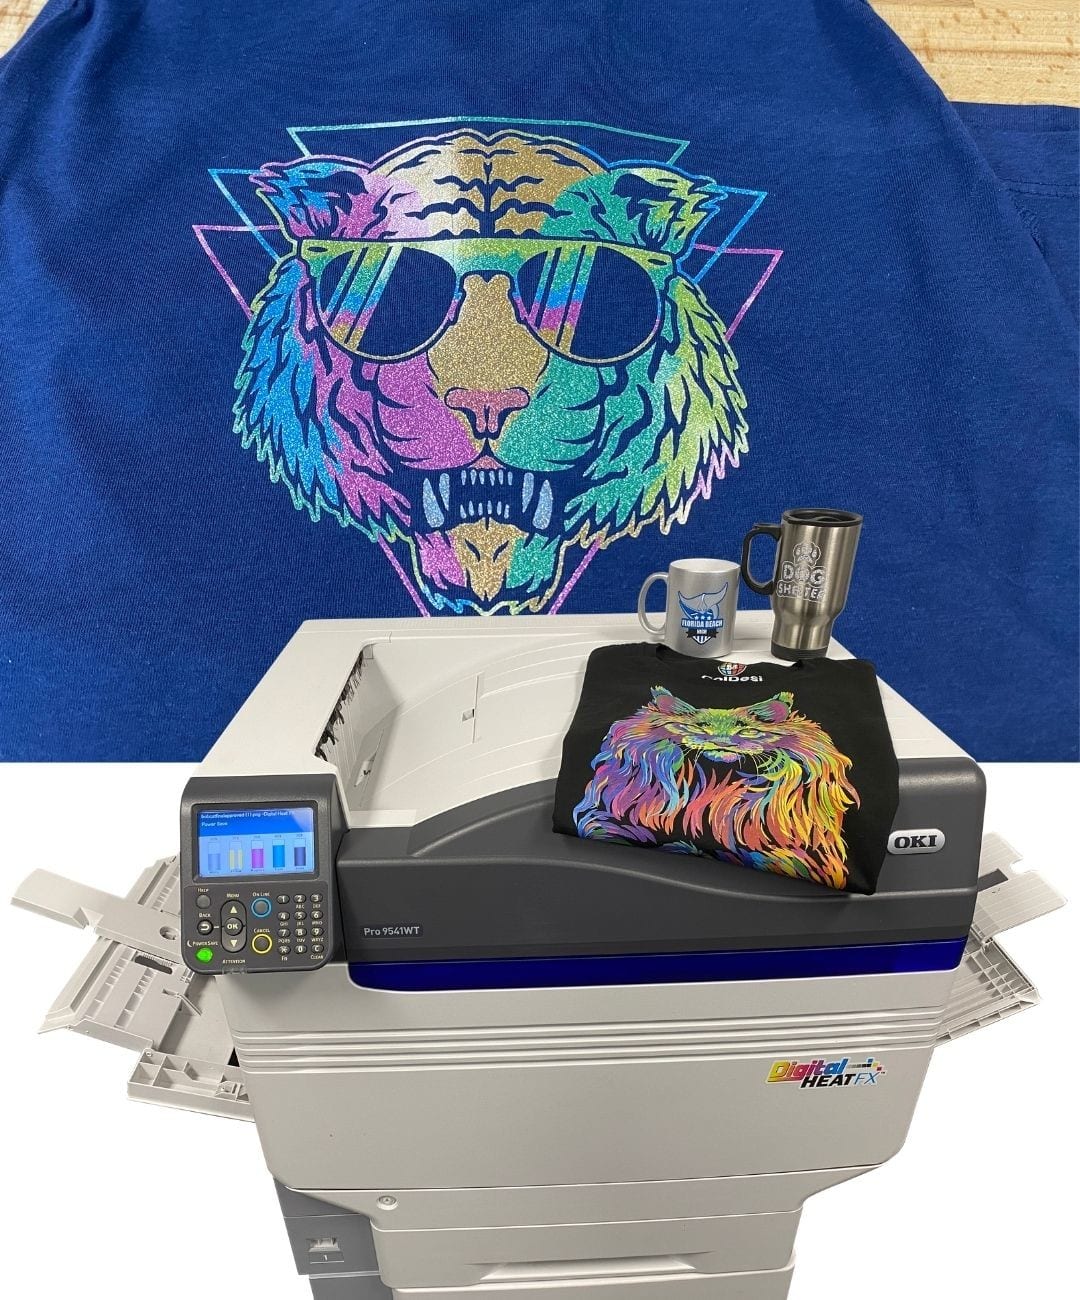 Printers for T Shirts What's the Best Type to Choose? - Printer Machine